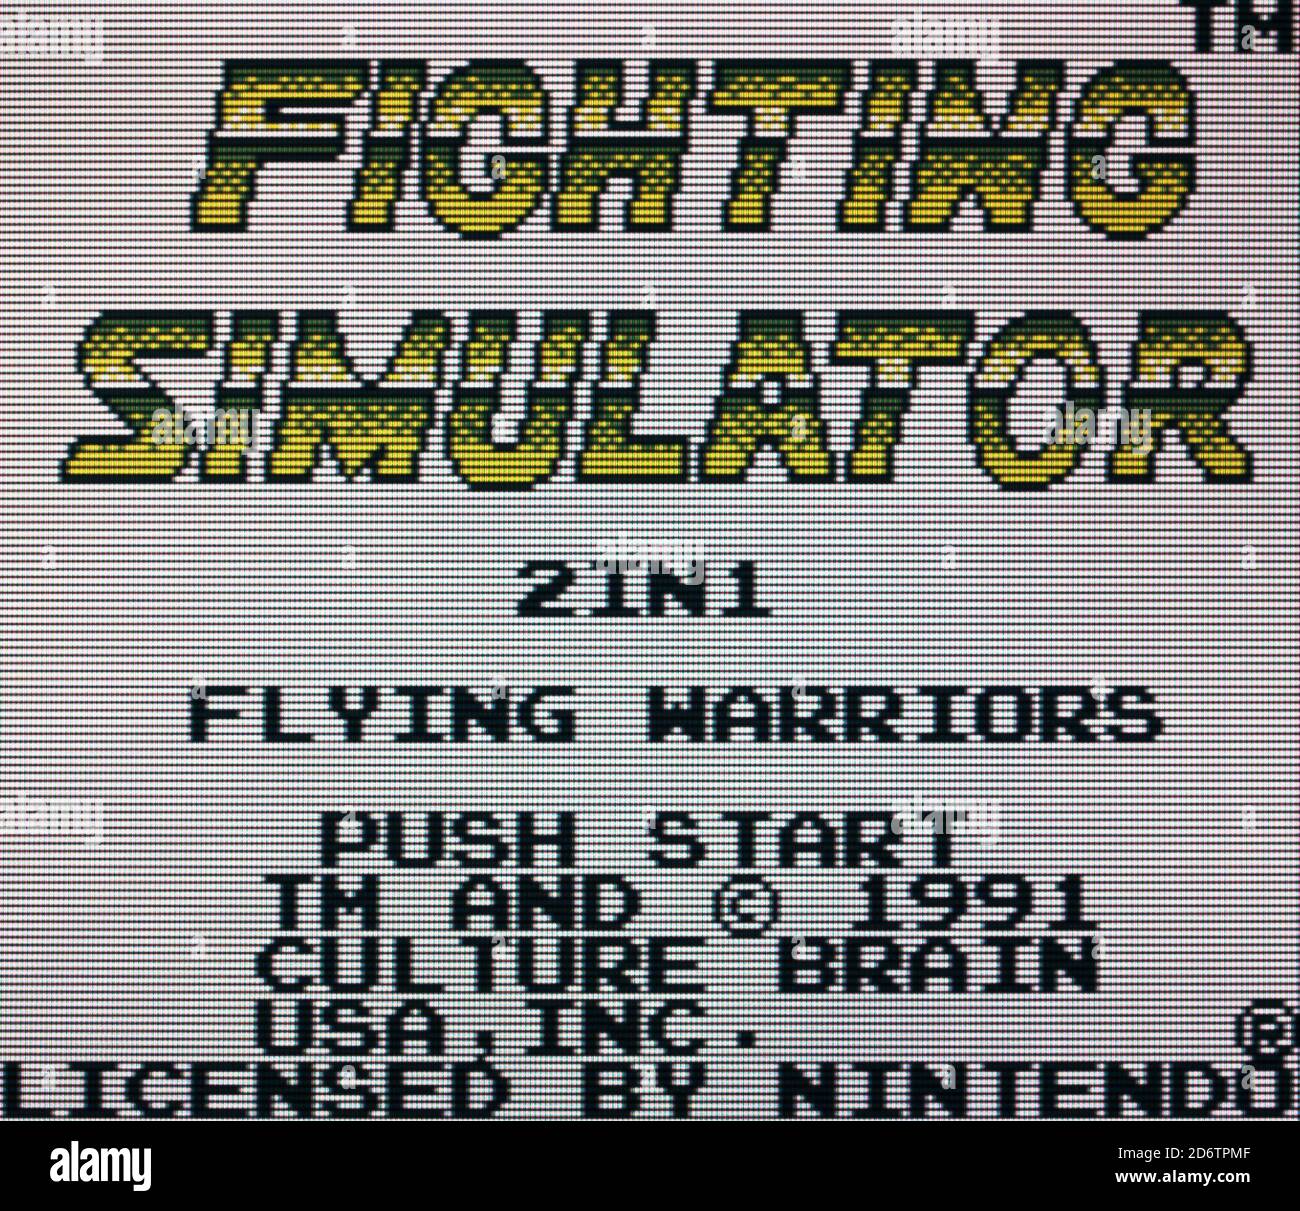 Fighting Simulator - Nintendo Gameboy Videogame - Editorial use only Stock Photo